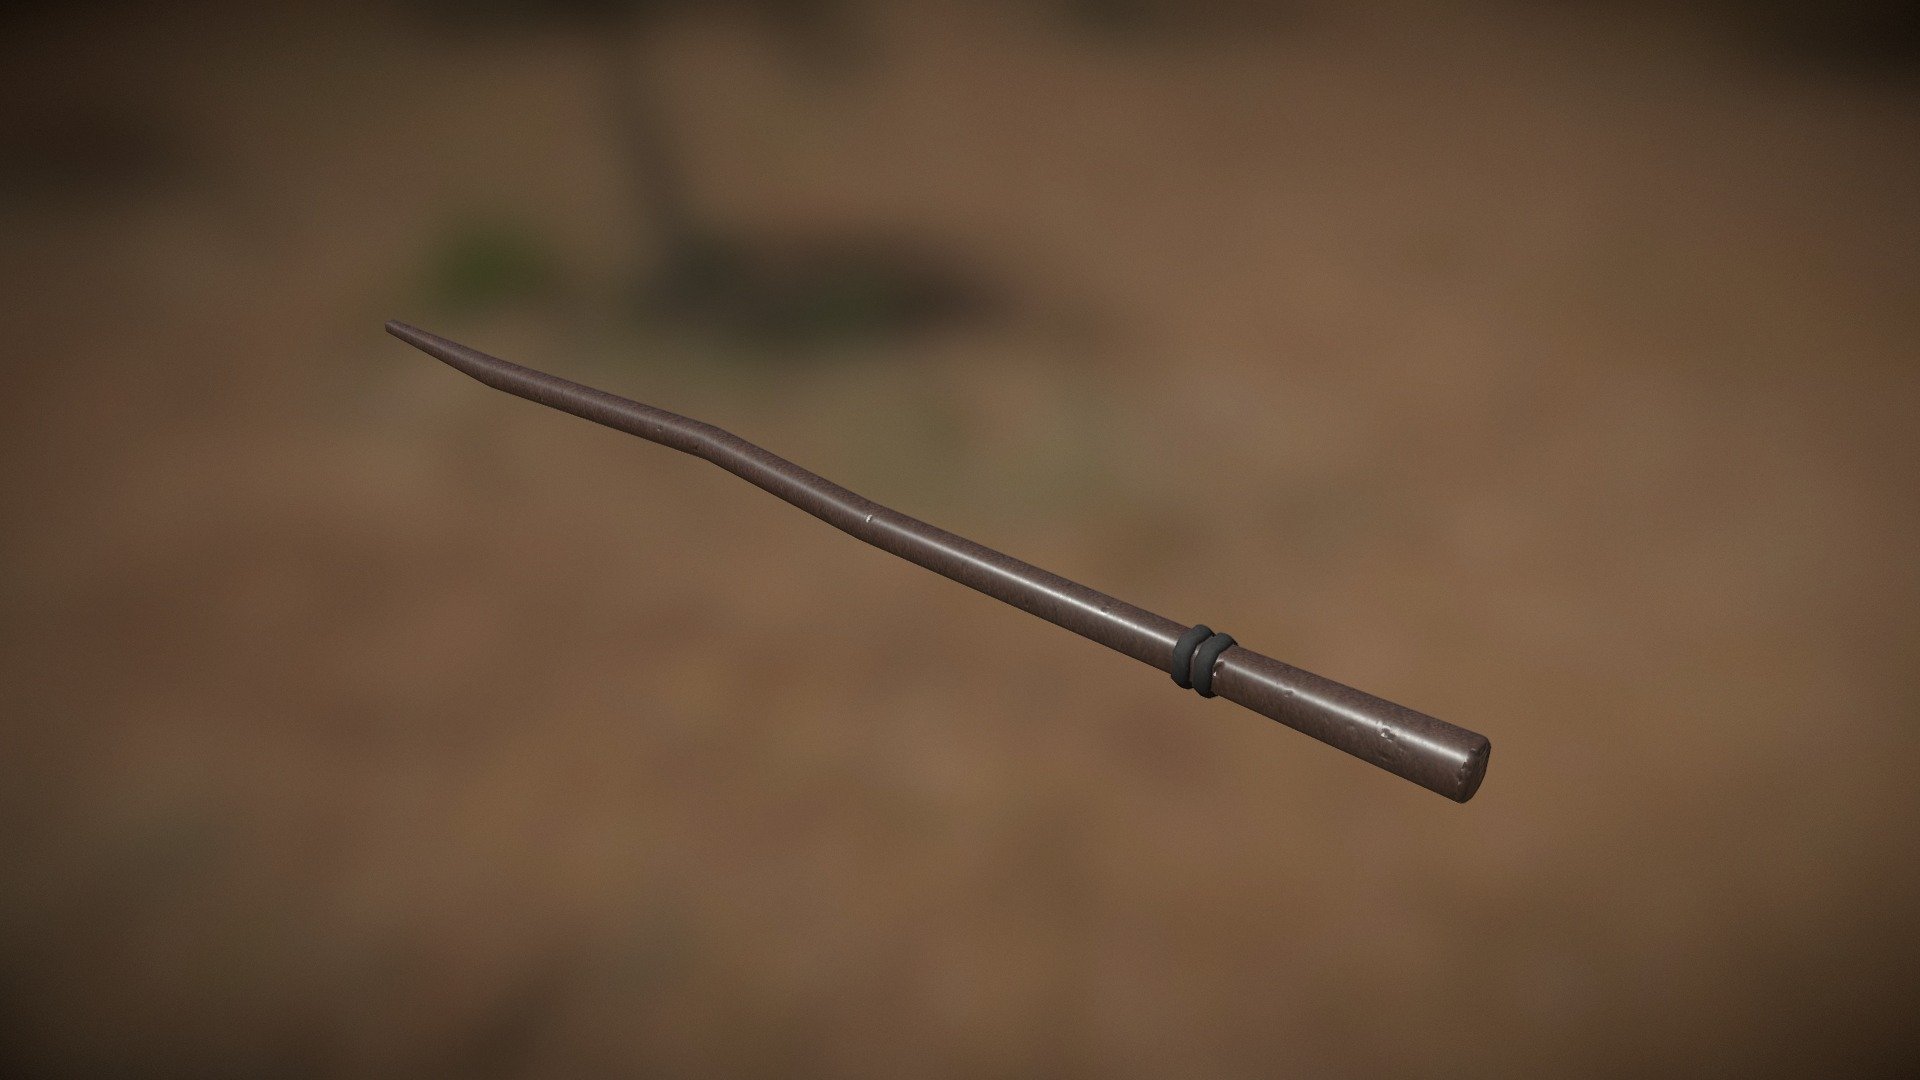 Free Low poly wand model. Made with 3ds Max and Substance Painter 3d model